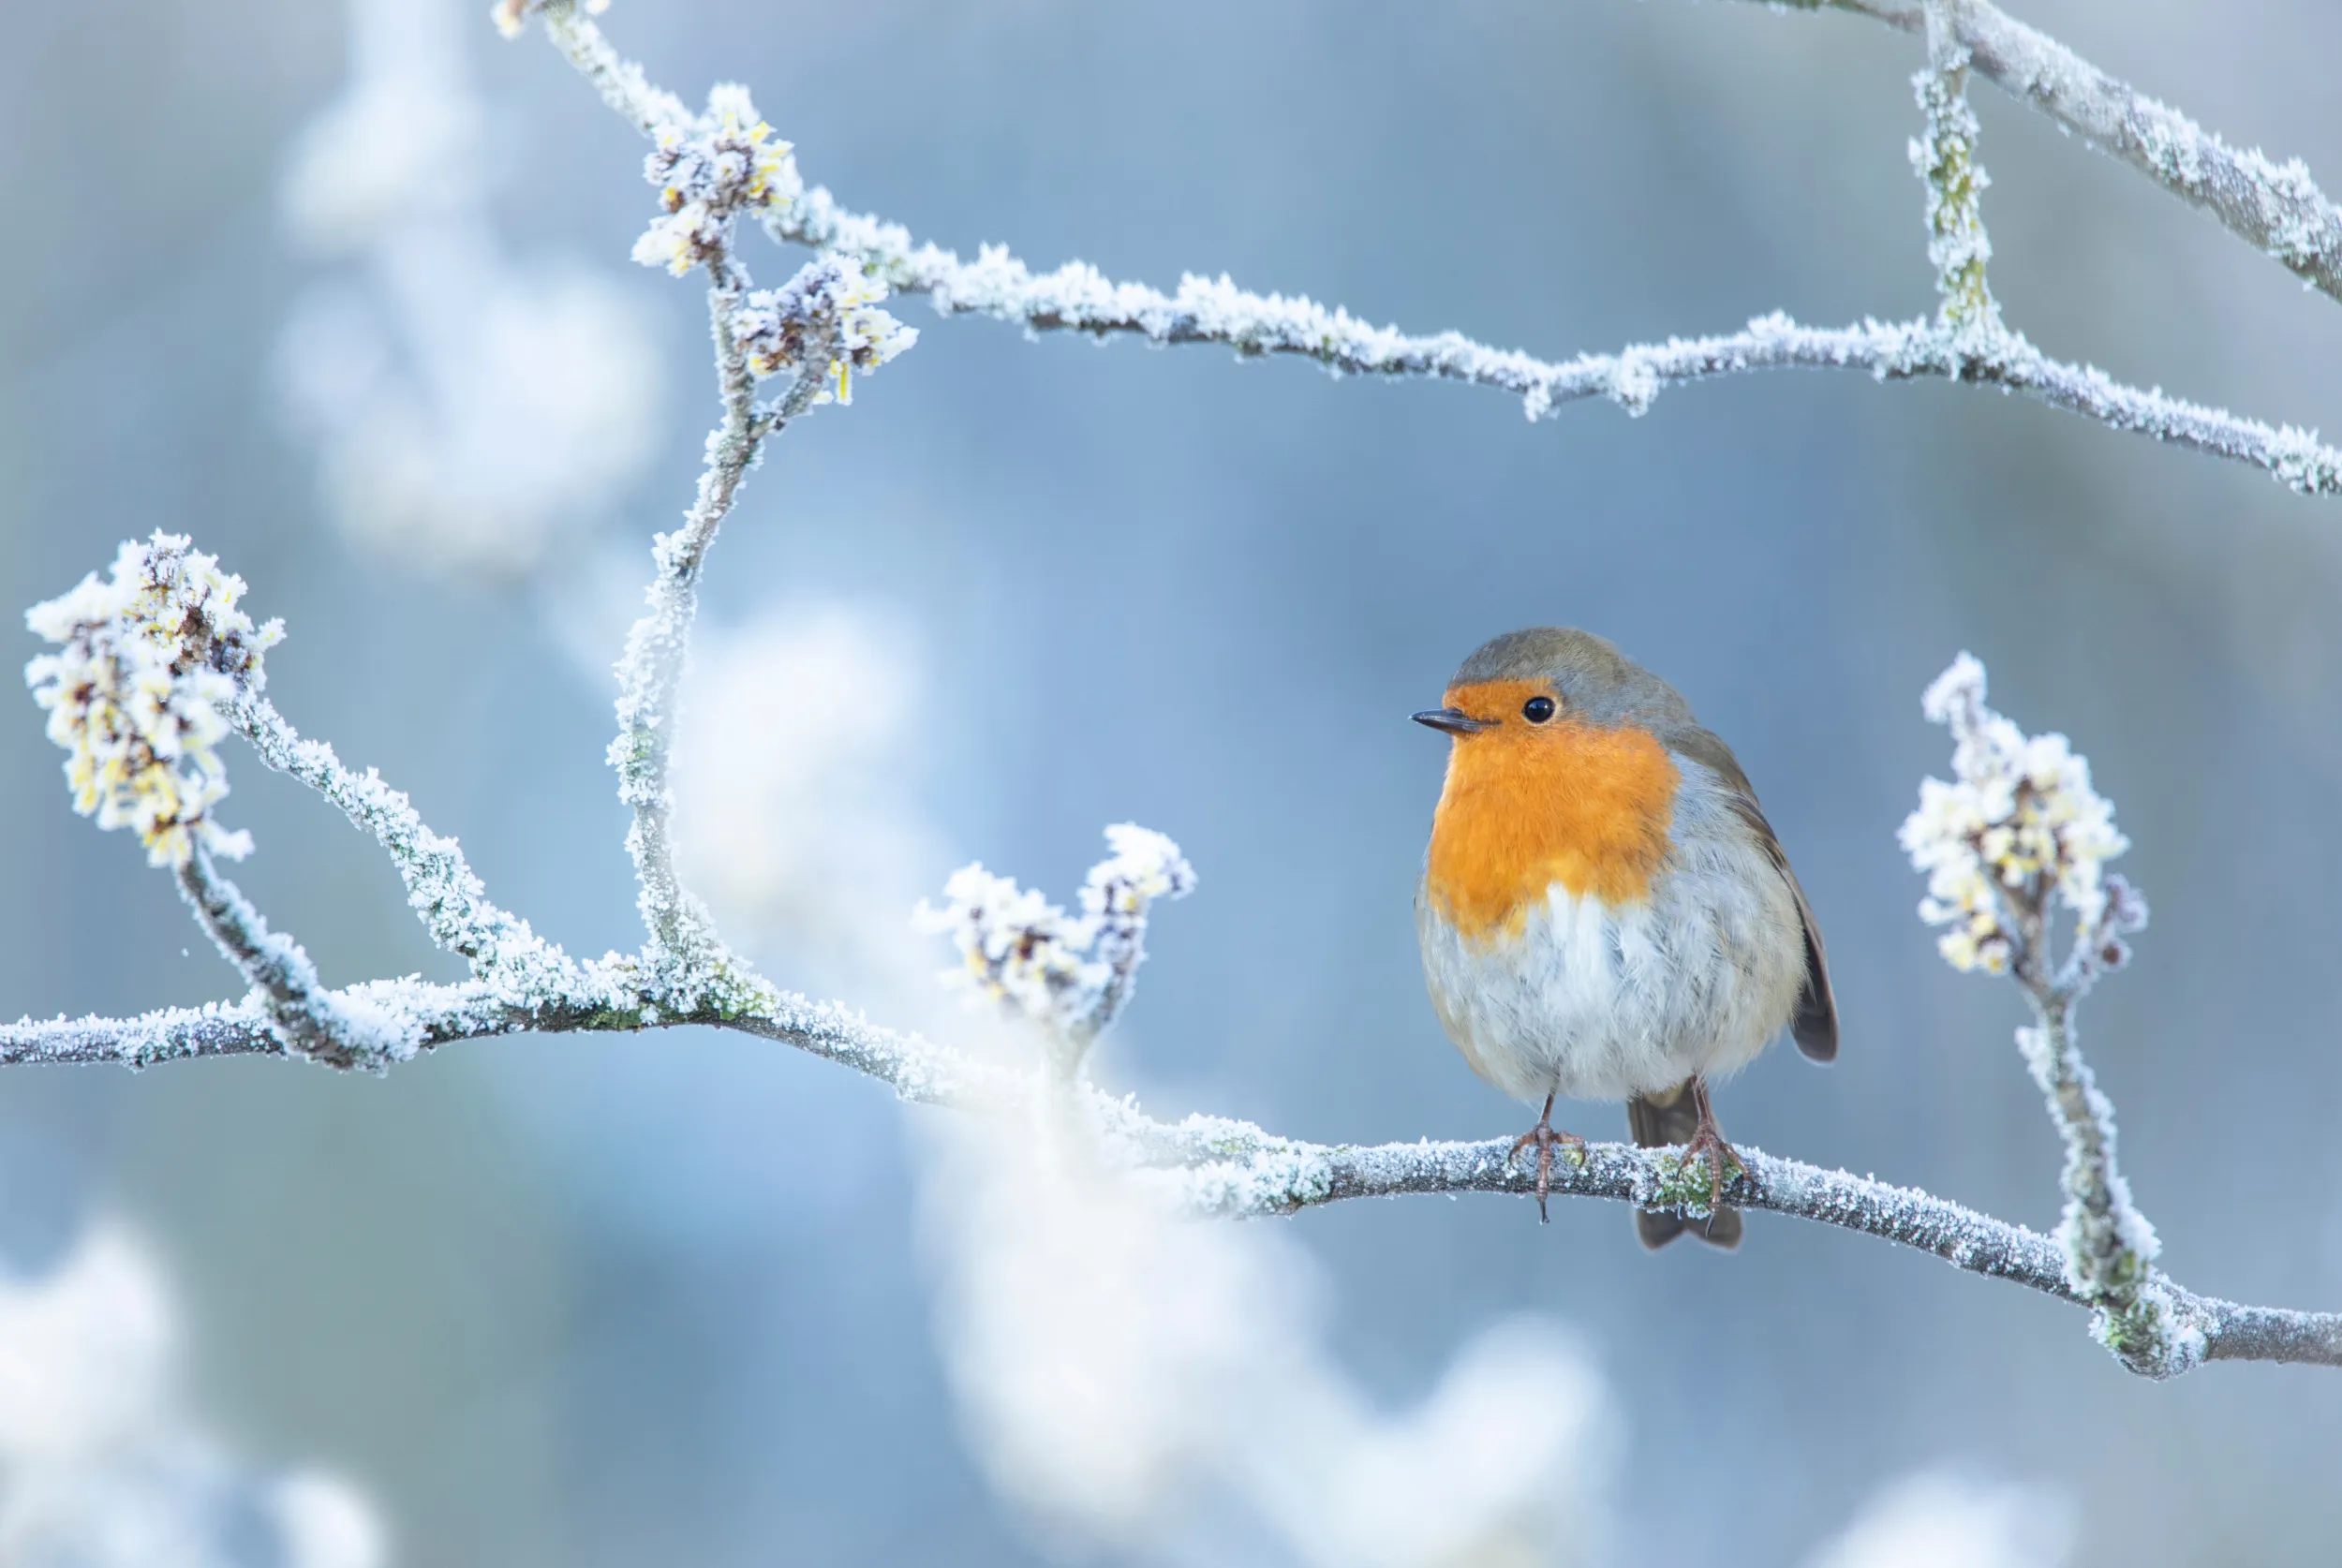 Robin perched on a frosty branch